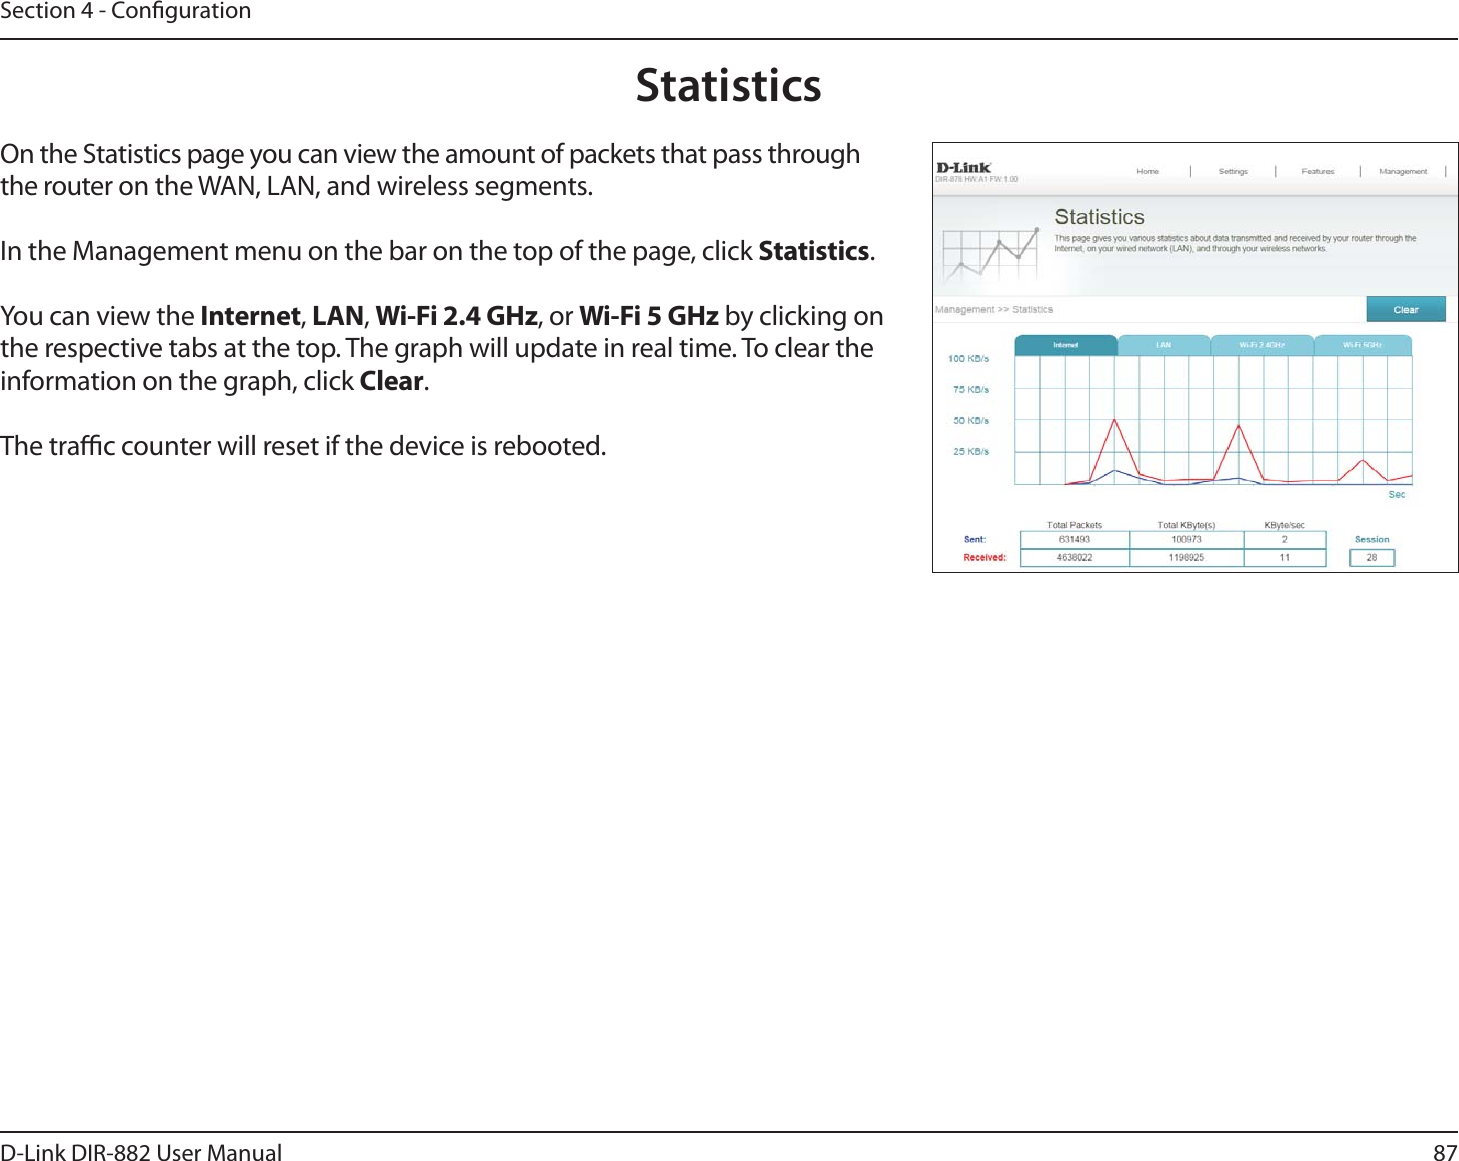 87D-Link DIR-882 User ManualSection 4 - CongurationStatisticsOn the Statistics page you can view the amount of packets that pass through the router on the WAN, LAN, and wireless segments.In the Management menu on the bar on the top of the page, click Statistics.You can view the Internet, -&quot;/, 8J&apos;J()[, or 8J&apos;J()[ by clicking on the respective tabs at the top. The graph will update in real time. To clear the information on the graph, click Clear.The trac counter will reset if the device is rebooted.